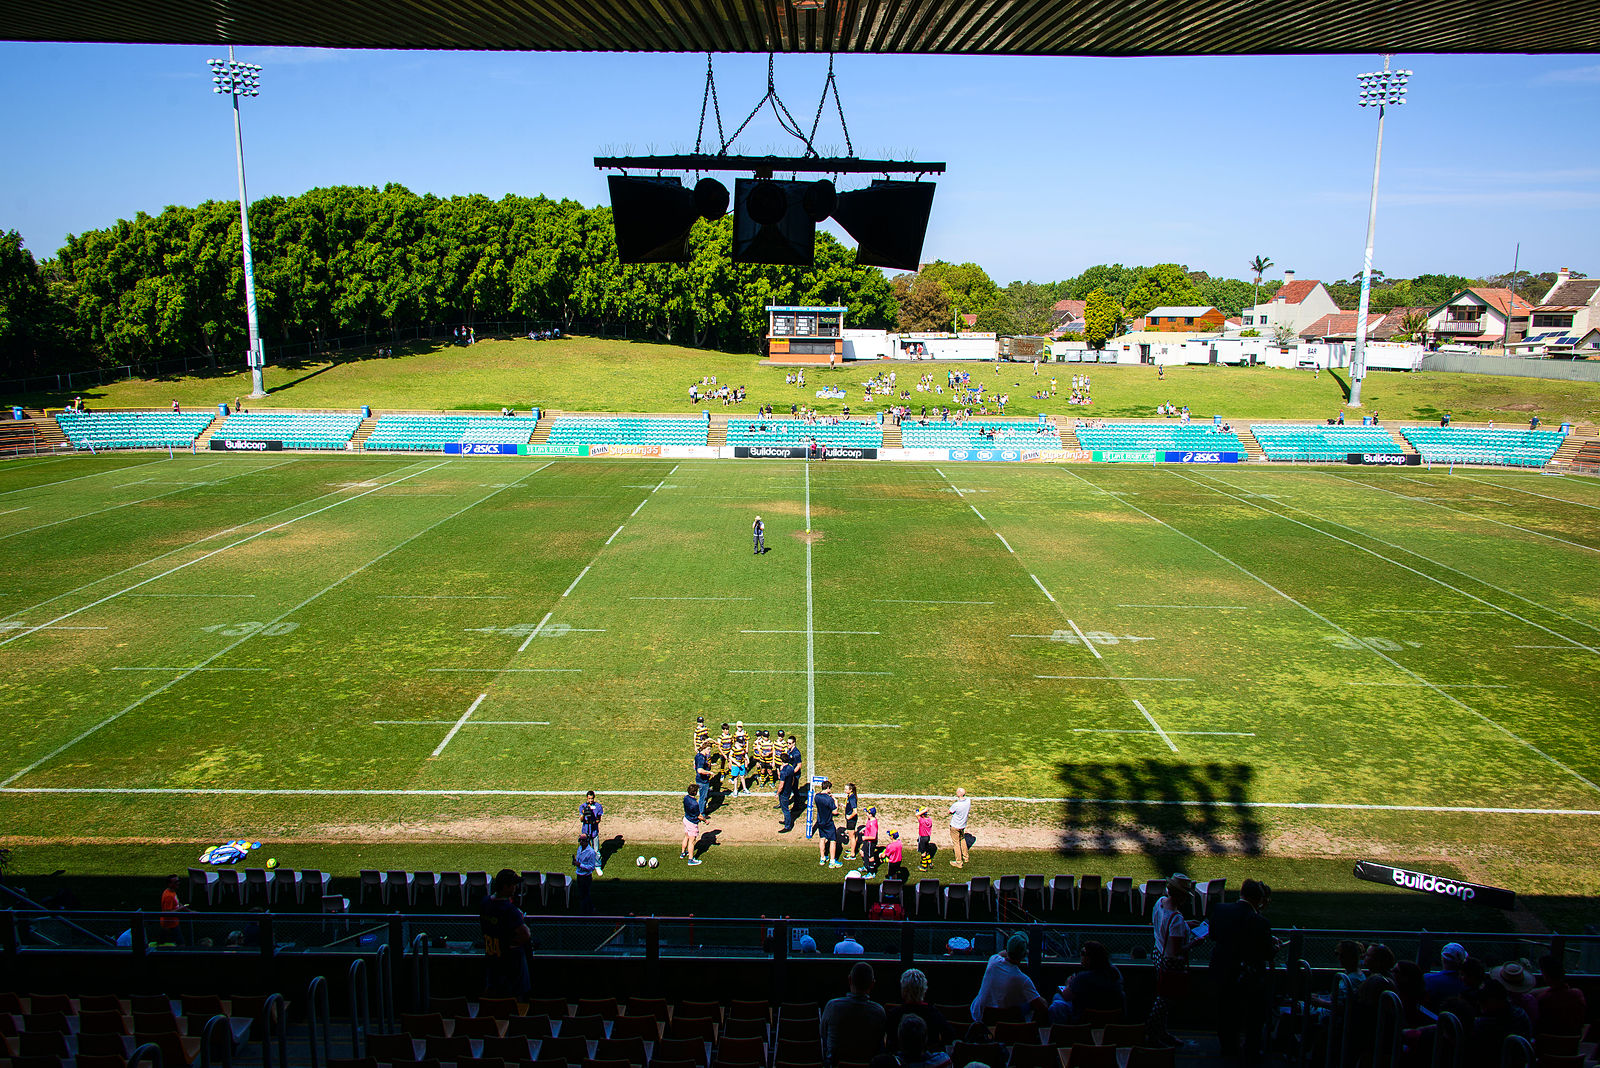 Inner West Council dedicates $10 million to saving Leichhardt Oval, state and federal governments yet to commit